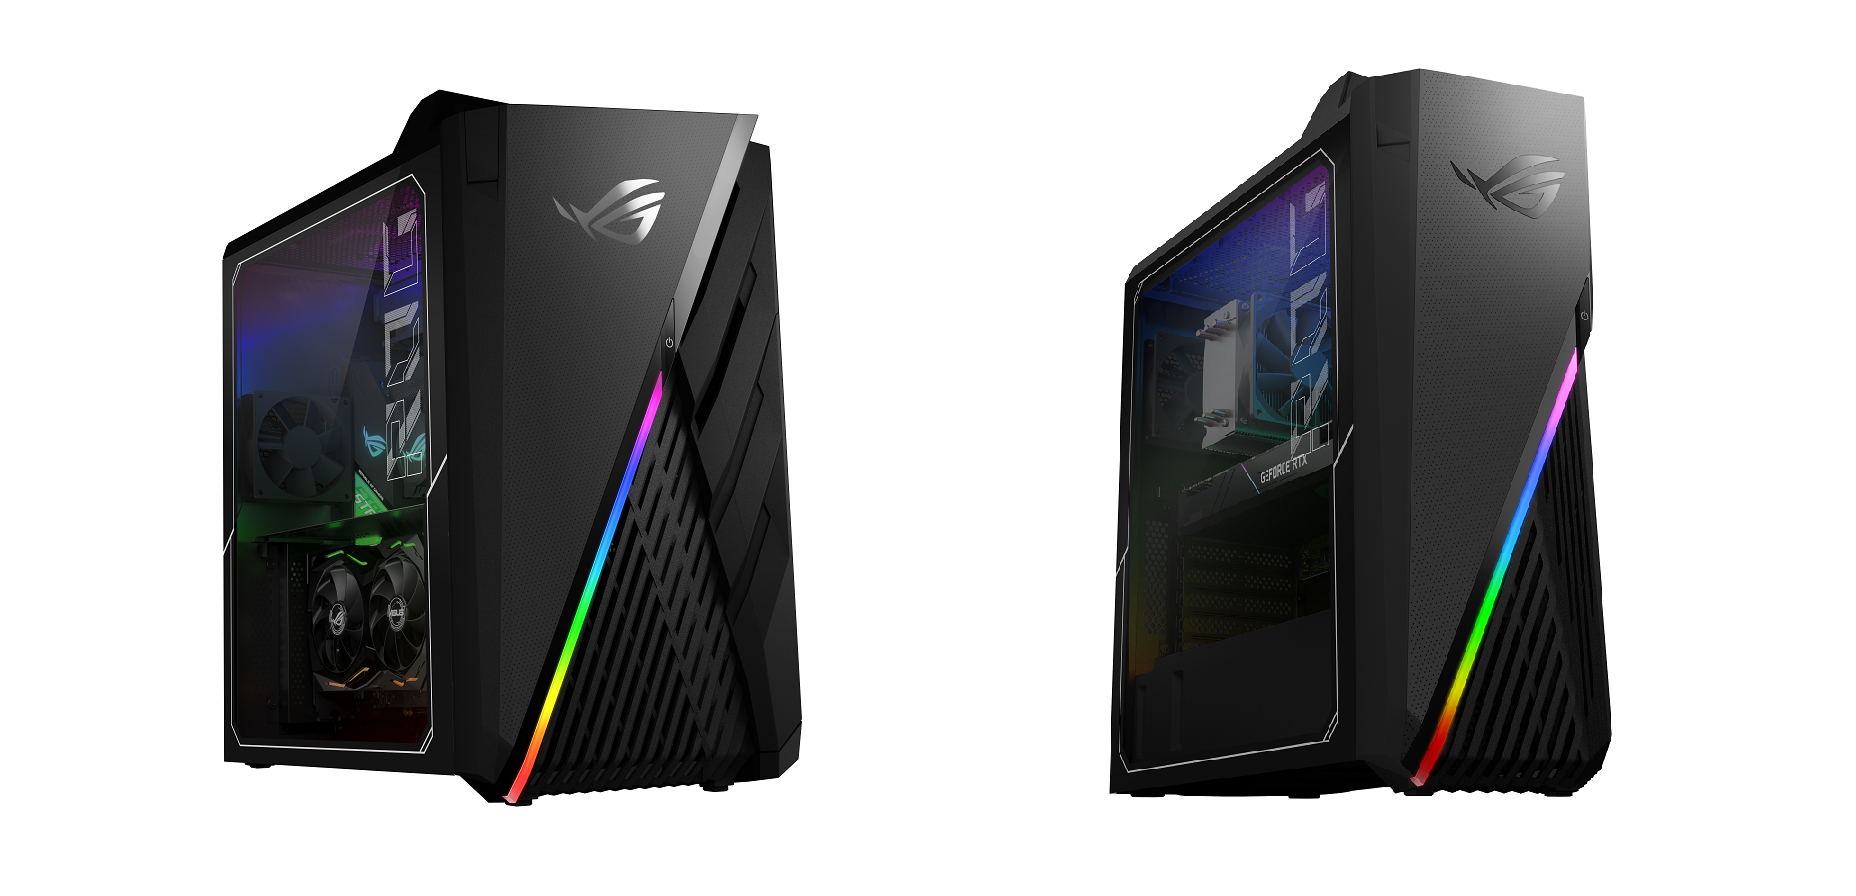 Asus Rog Announces New Lineup Of Esports Ready Strix Gaming